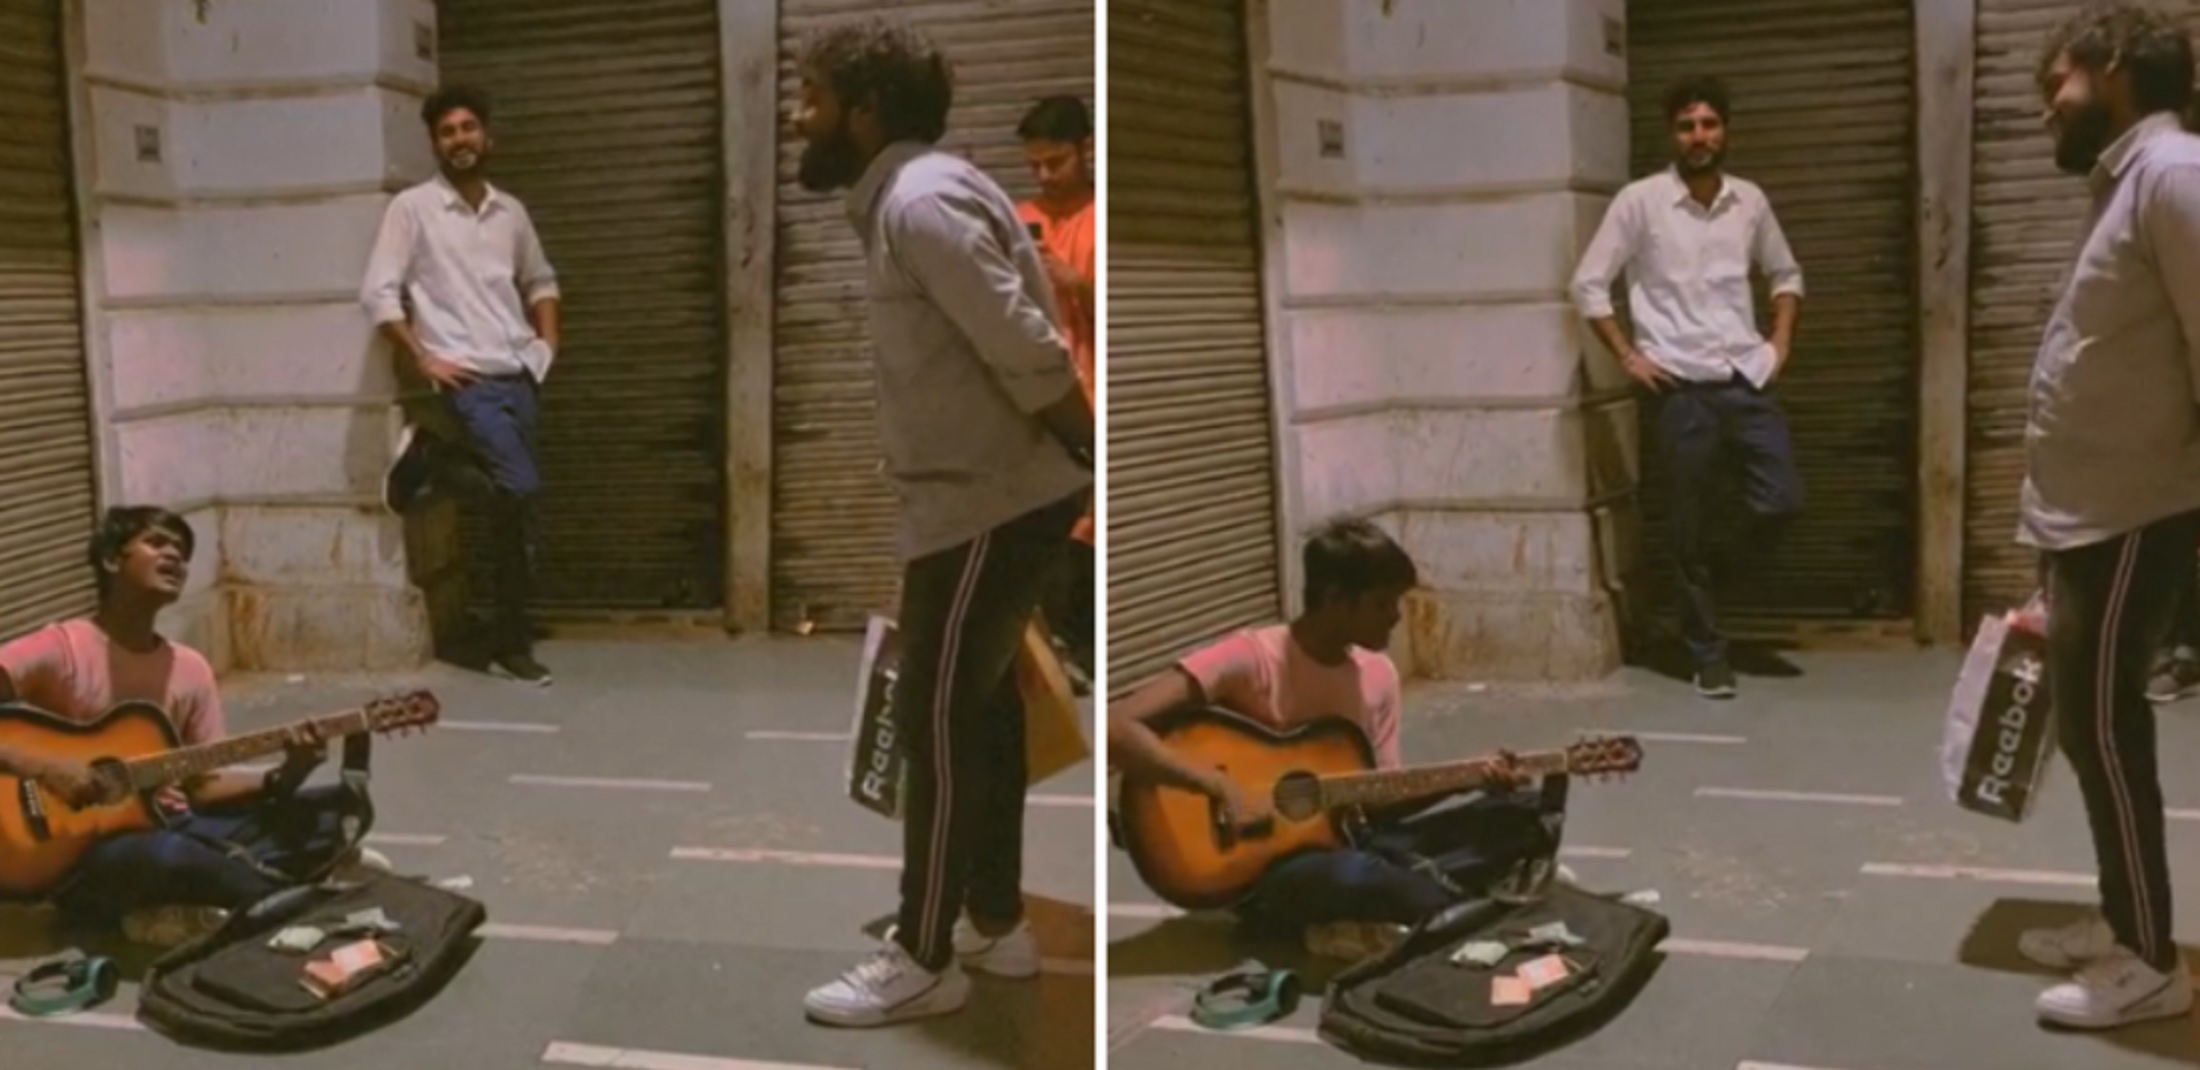 Viral Moment: Man Joins Street Musician In Singing At Delhi’s Connaught Place, Video Touches Hearts